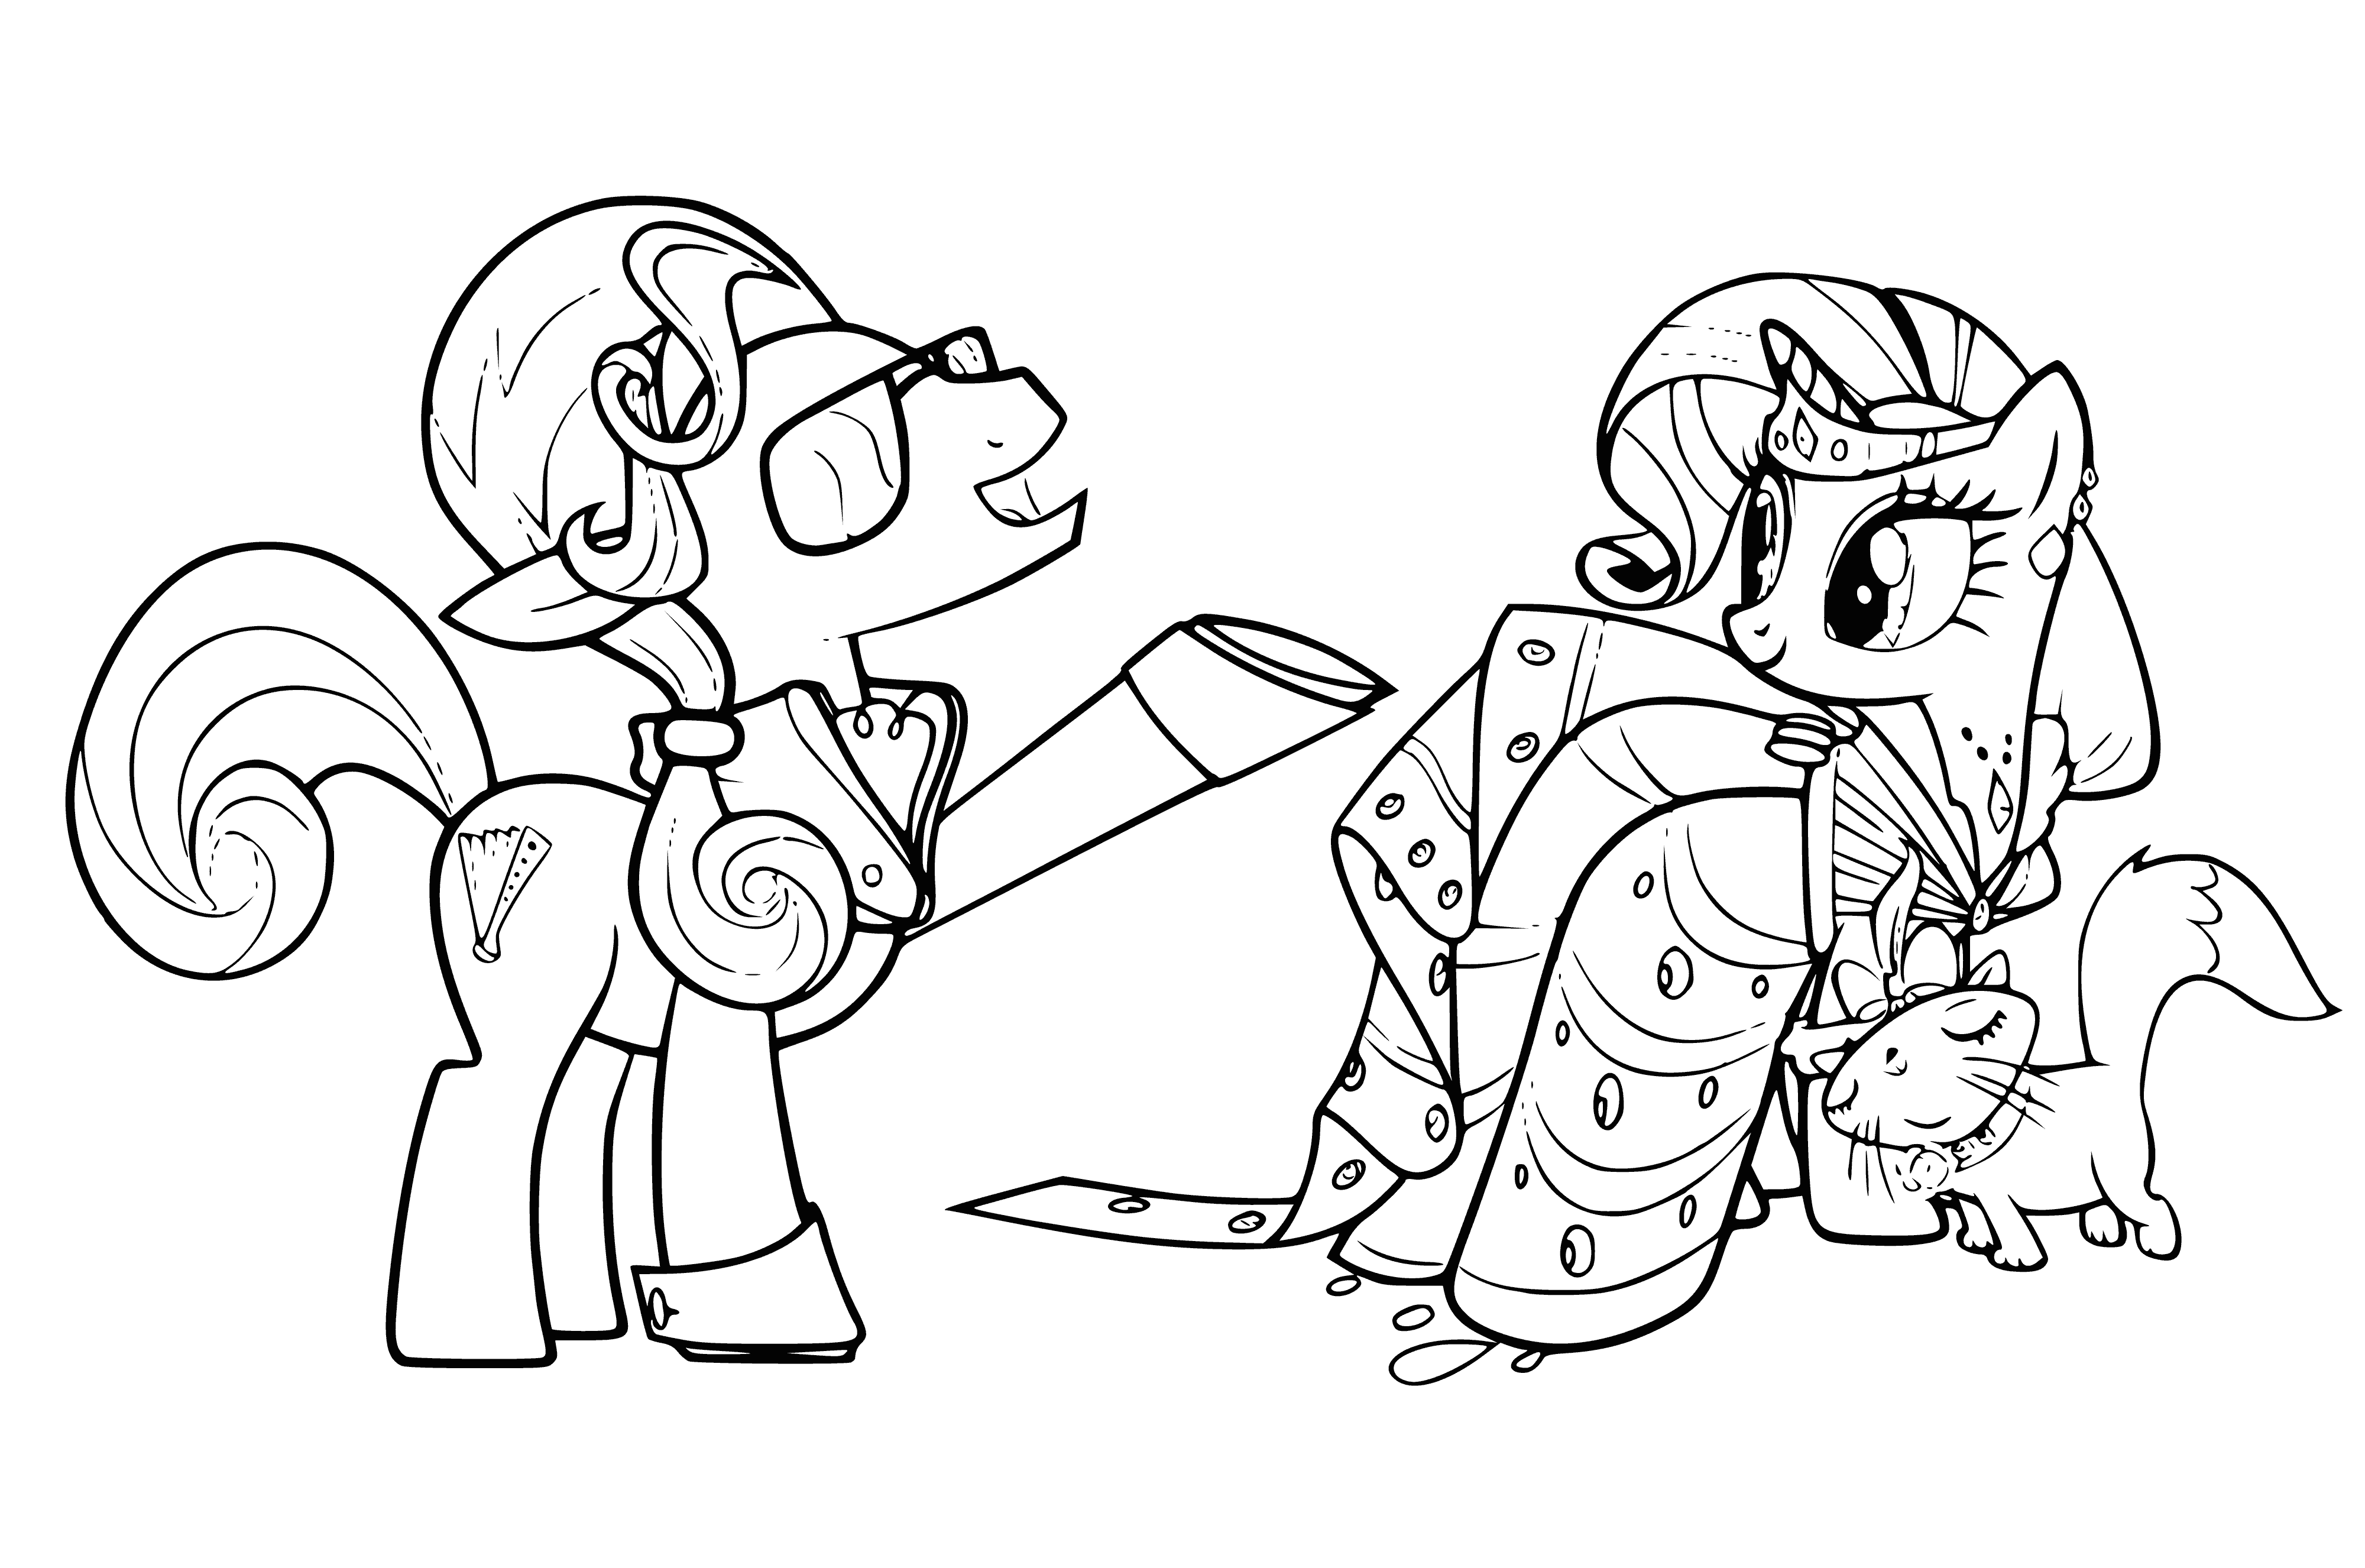 coloring page: White unicorn Rarity has a purple and pink mane, 3 pink diamonds cutie mark. Stands in a flowery field with pet dog.